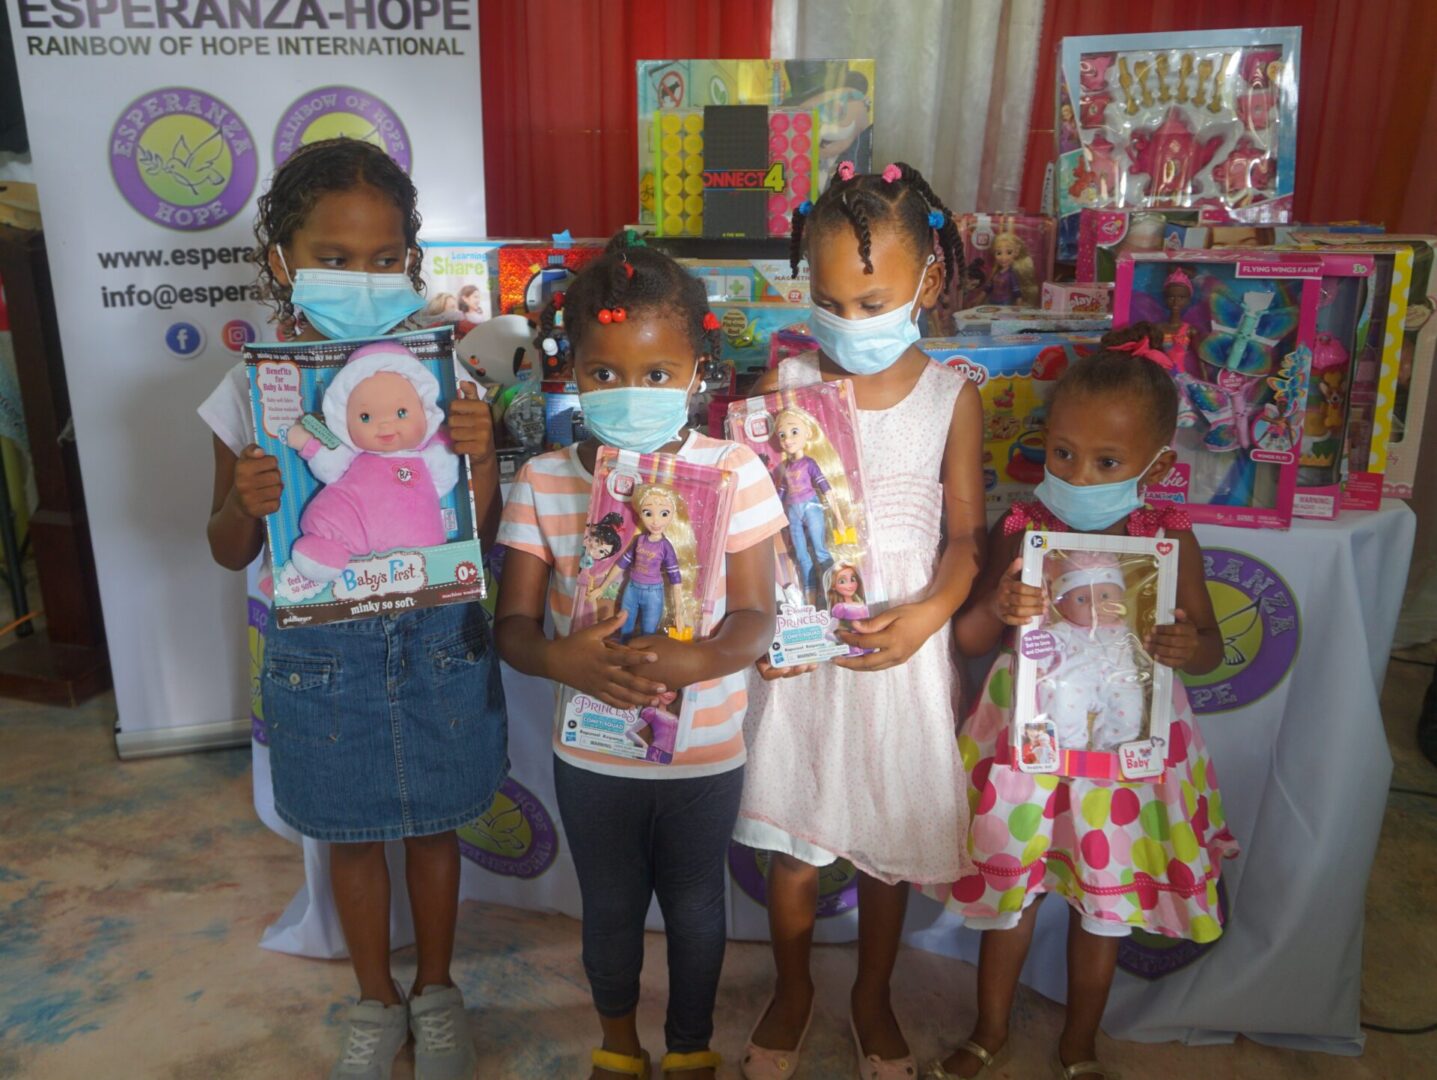 Four young girls, all wearing masks, each holding a doll in a box